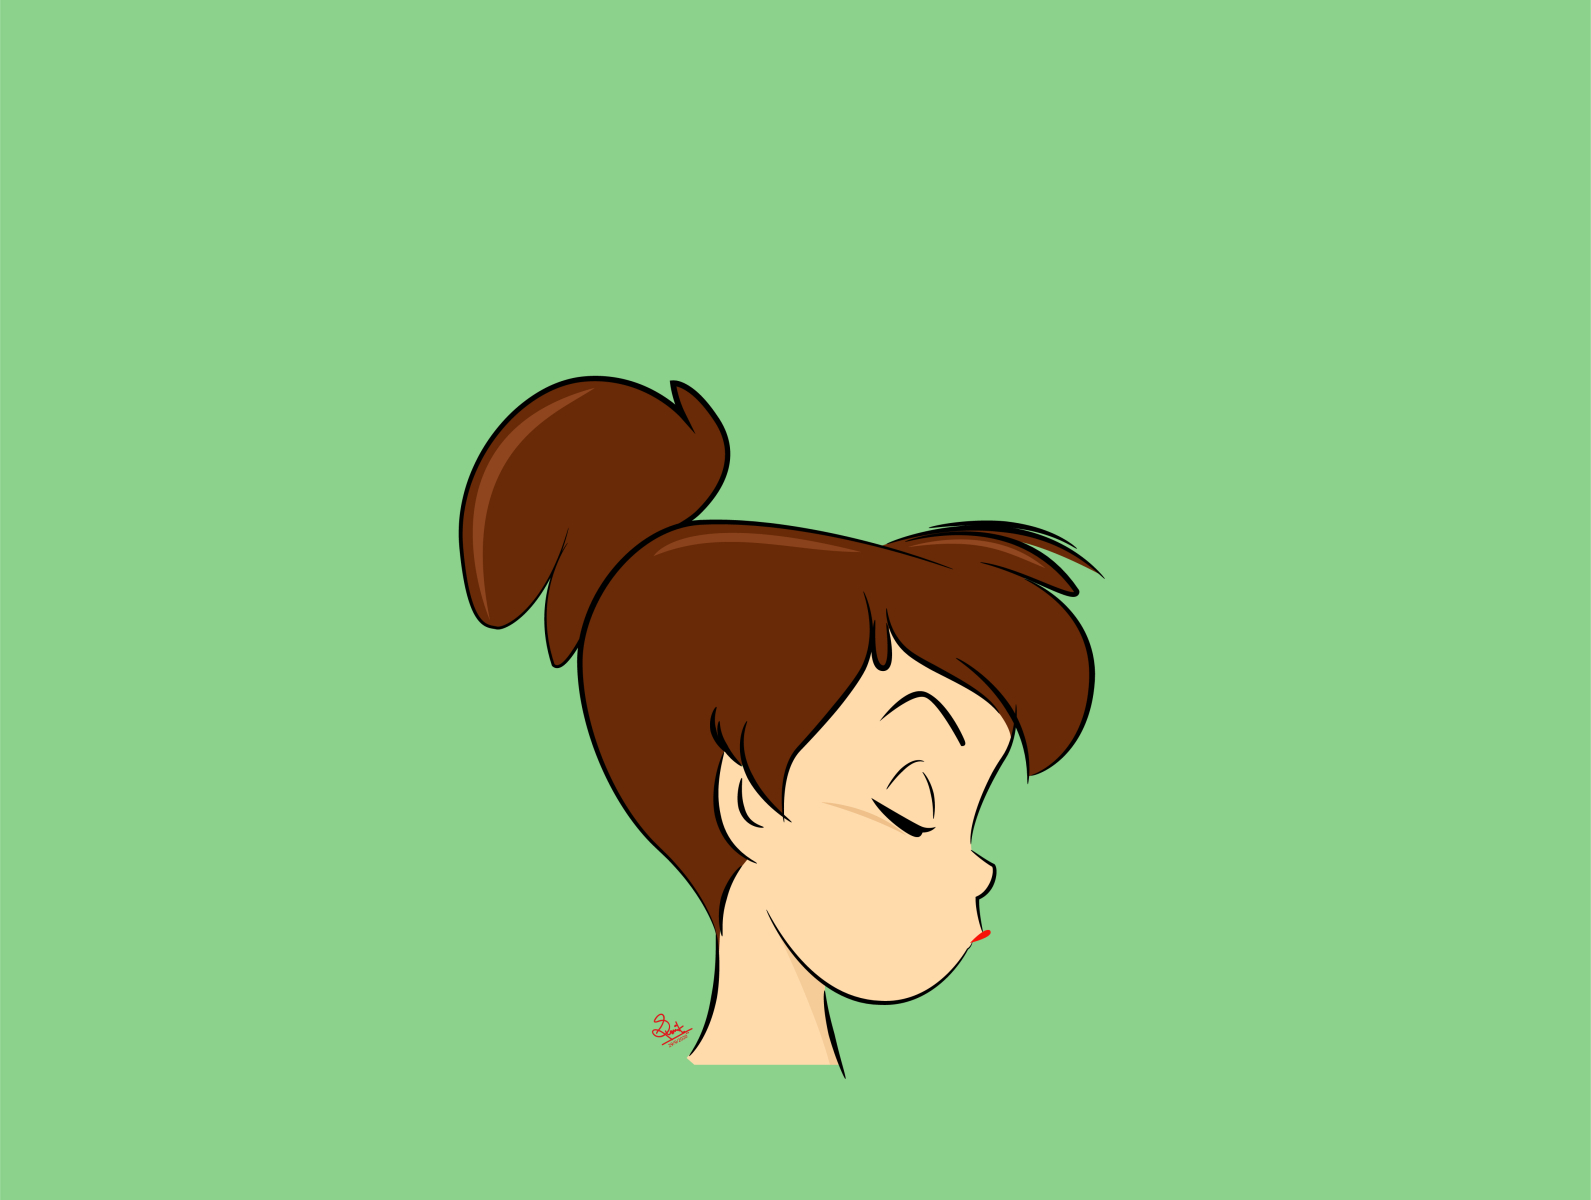 A cute angry girl by Sumit on Dribbble